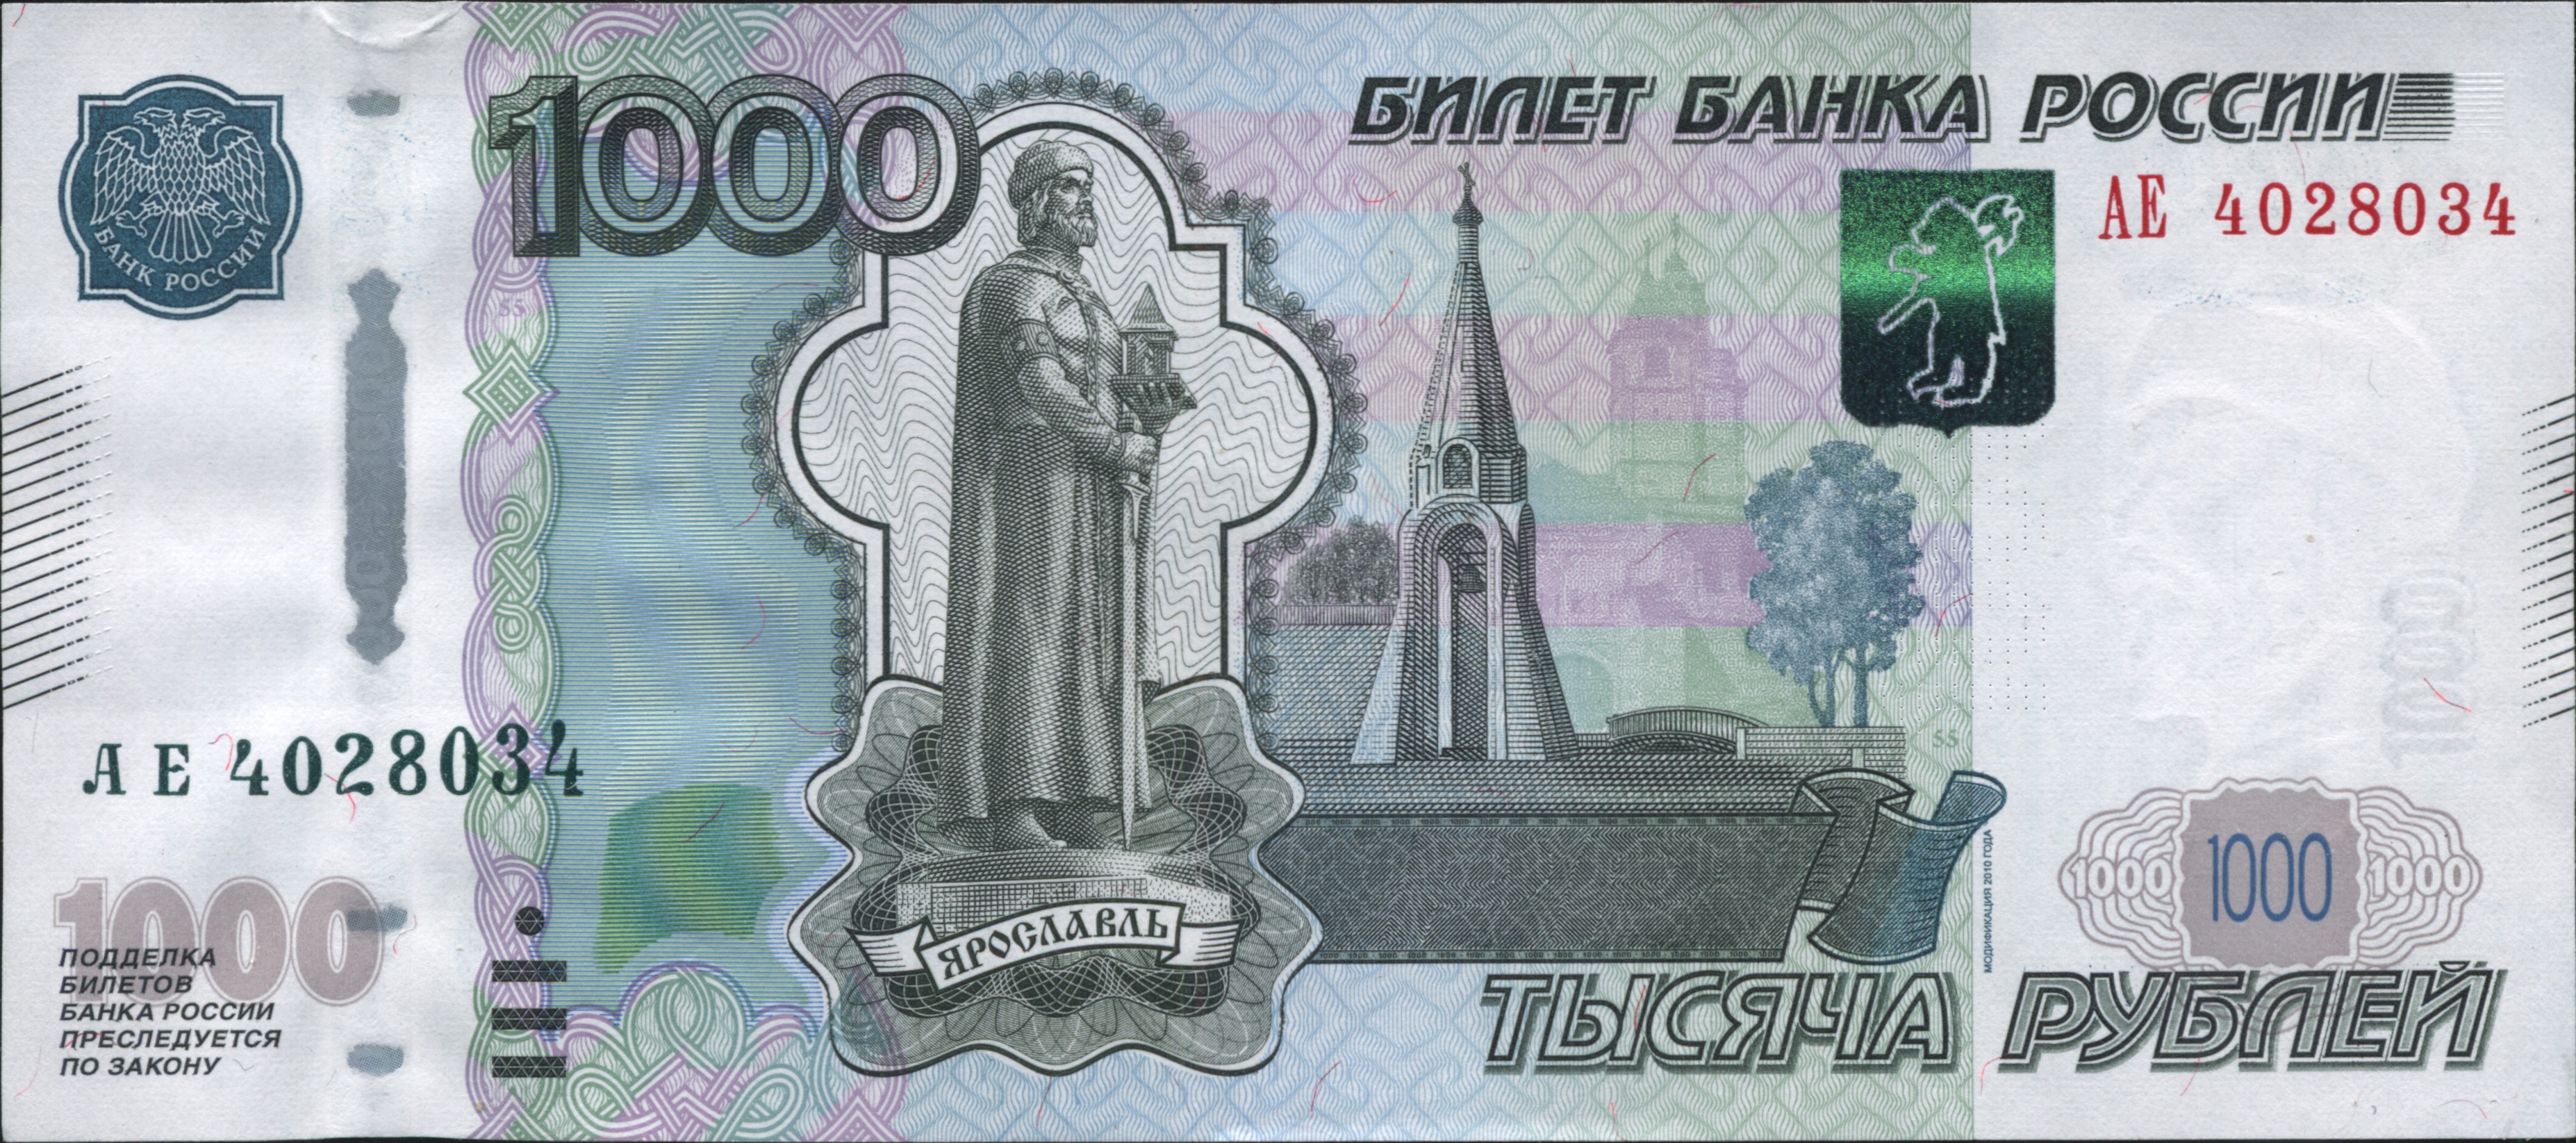 File:1000 Roubles 2010 front.jpg - Wikimedia Commons